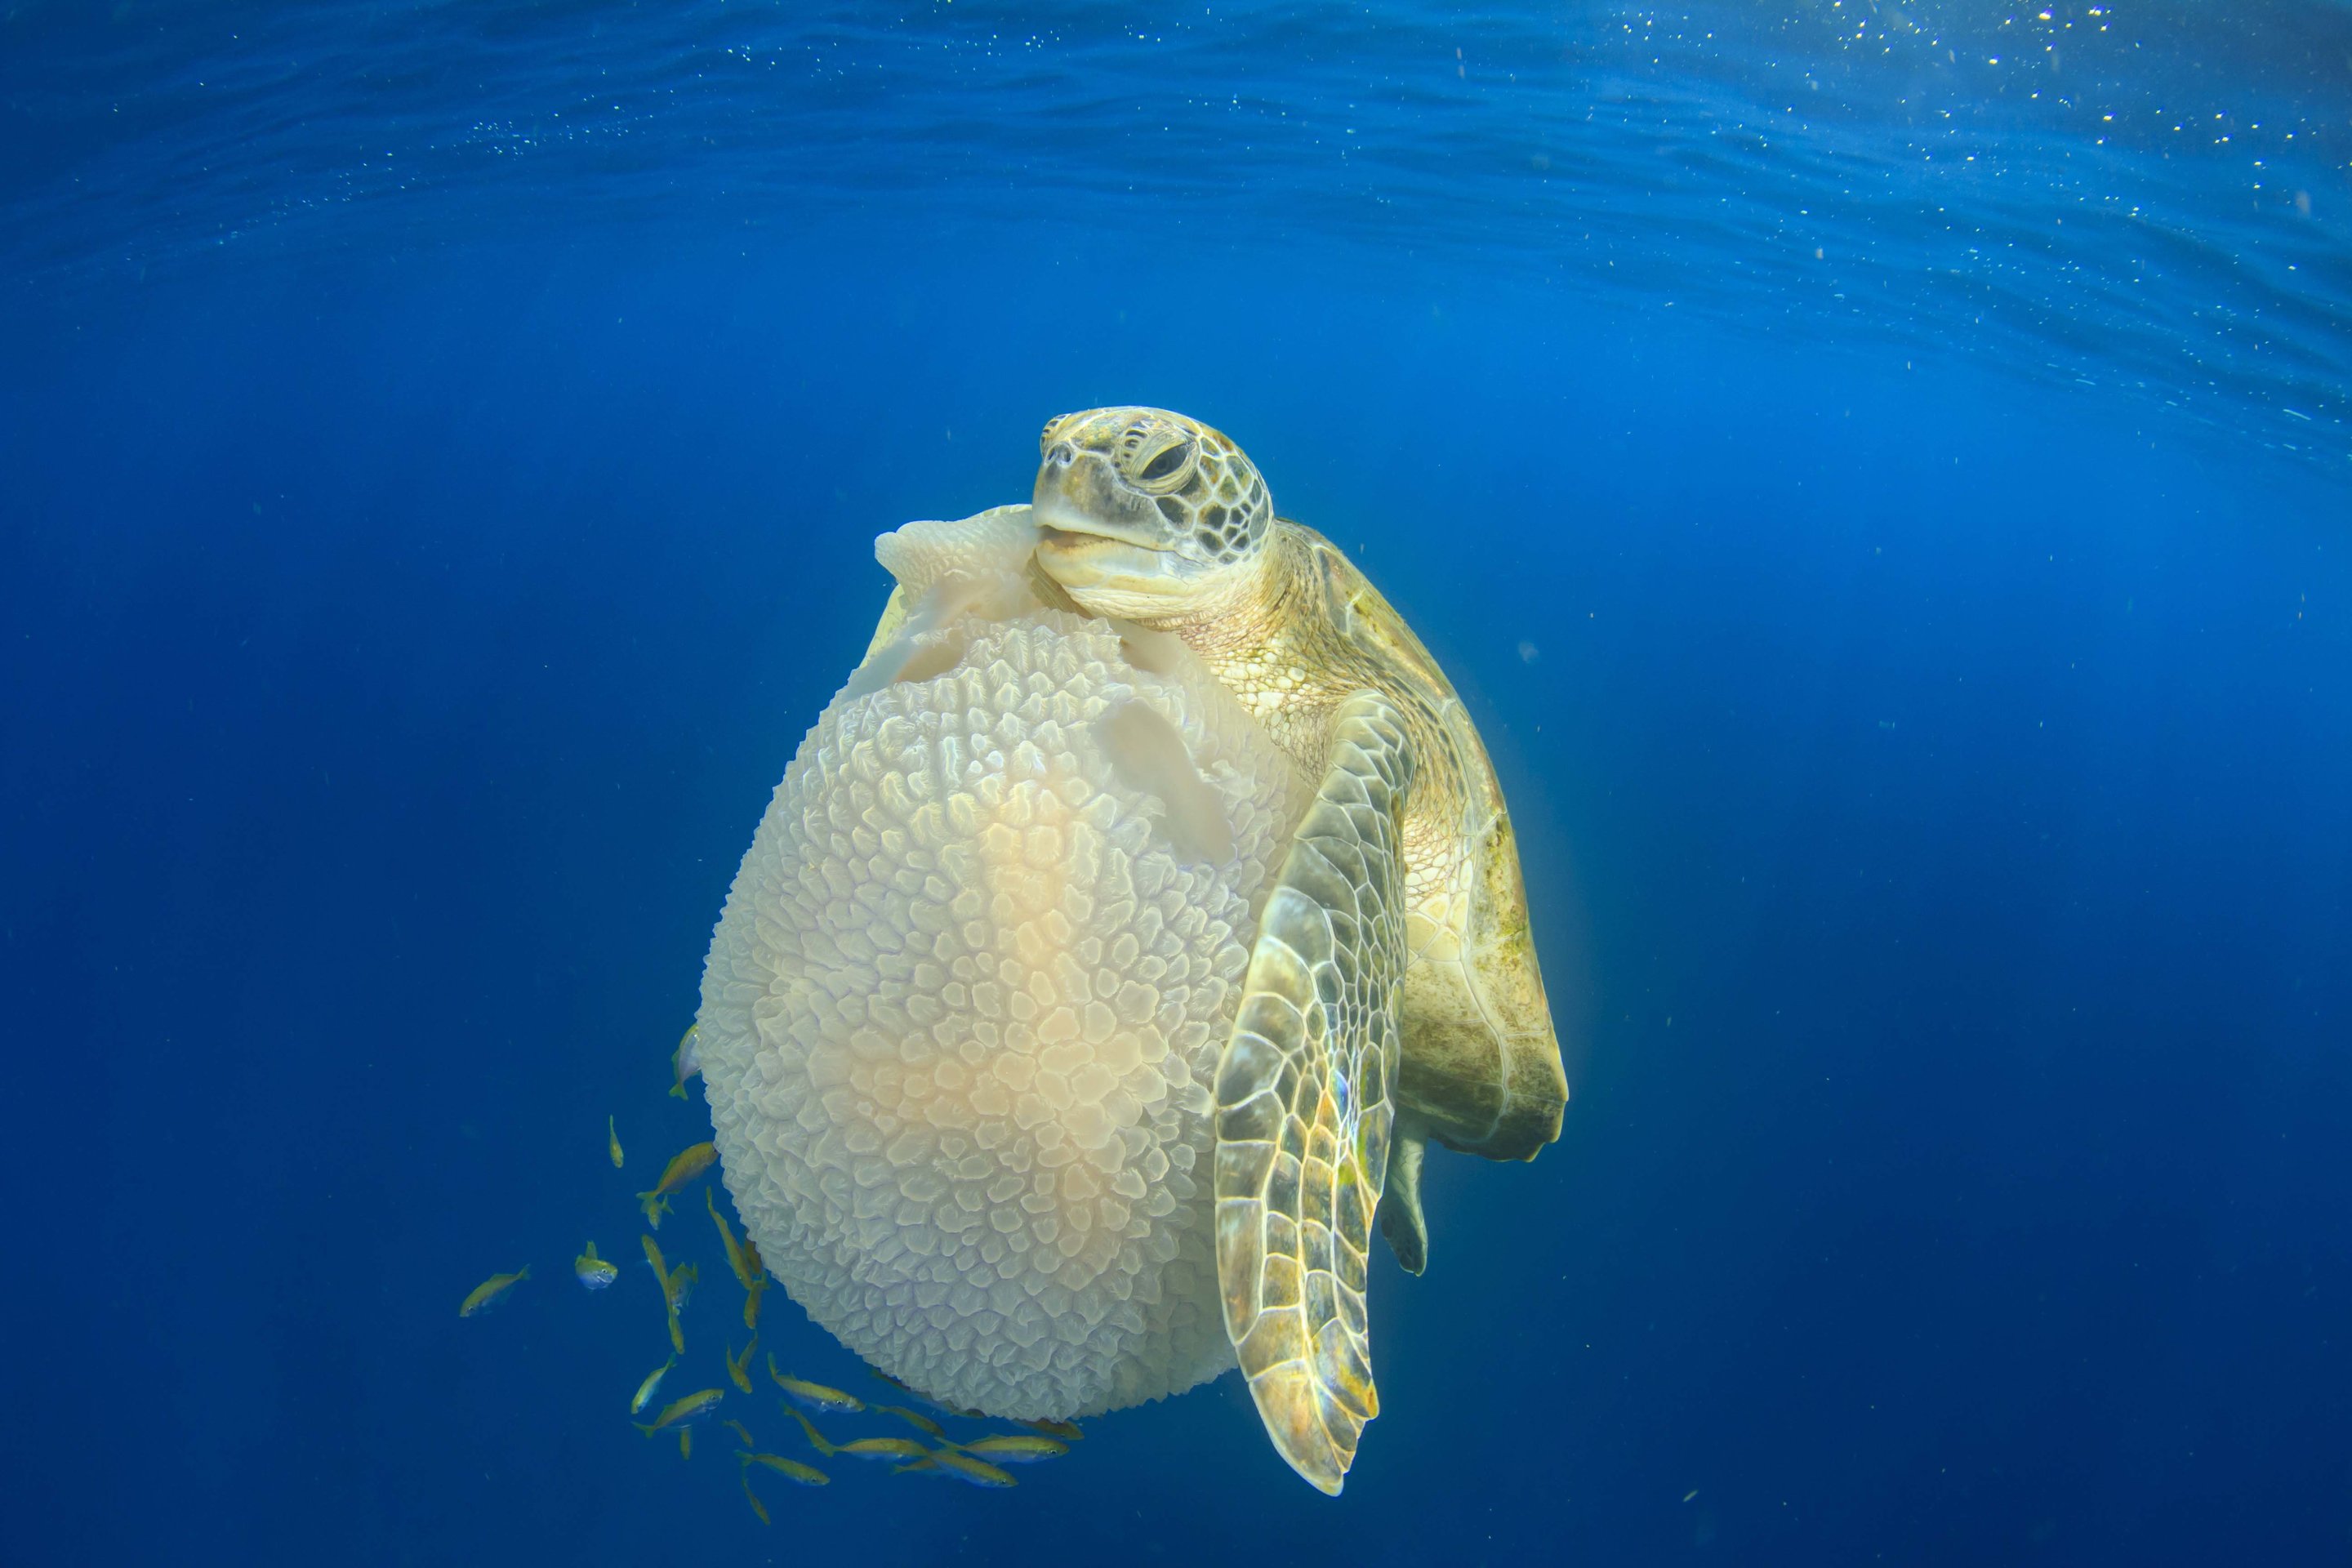 Sea Turtles Use Their Flippers to Handle Food Too